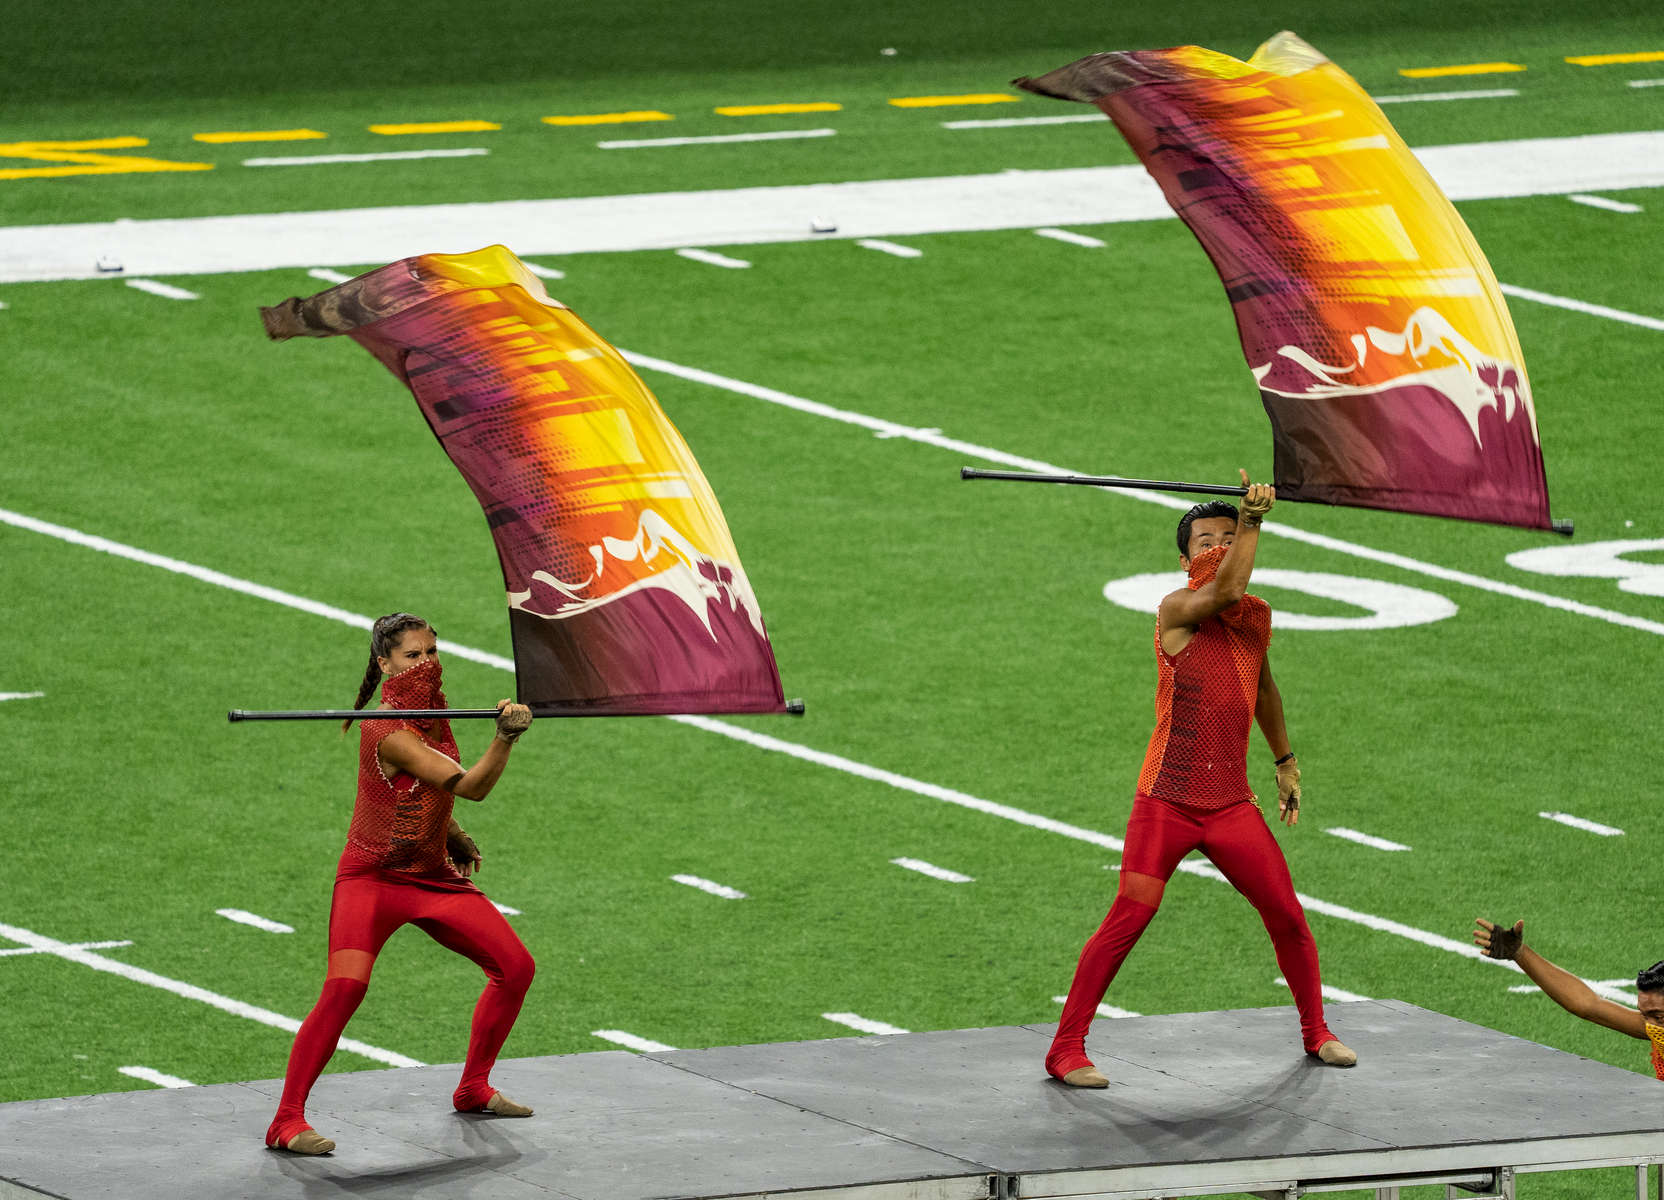 Photos from my seat of THE SANTA CLARA VANGUARD, 2018 DCI World Class Champion, with a score of 98.625.